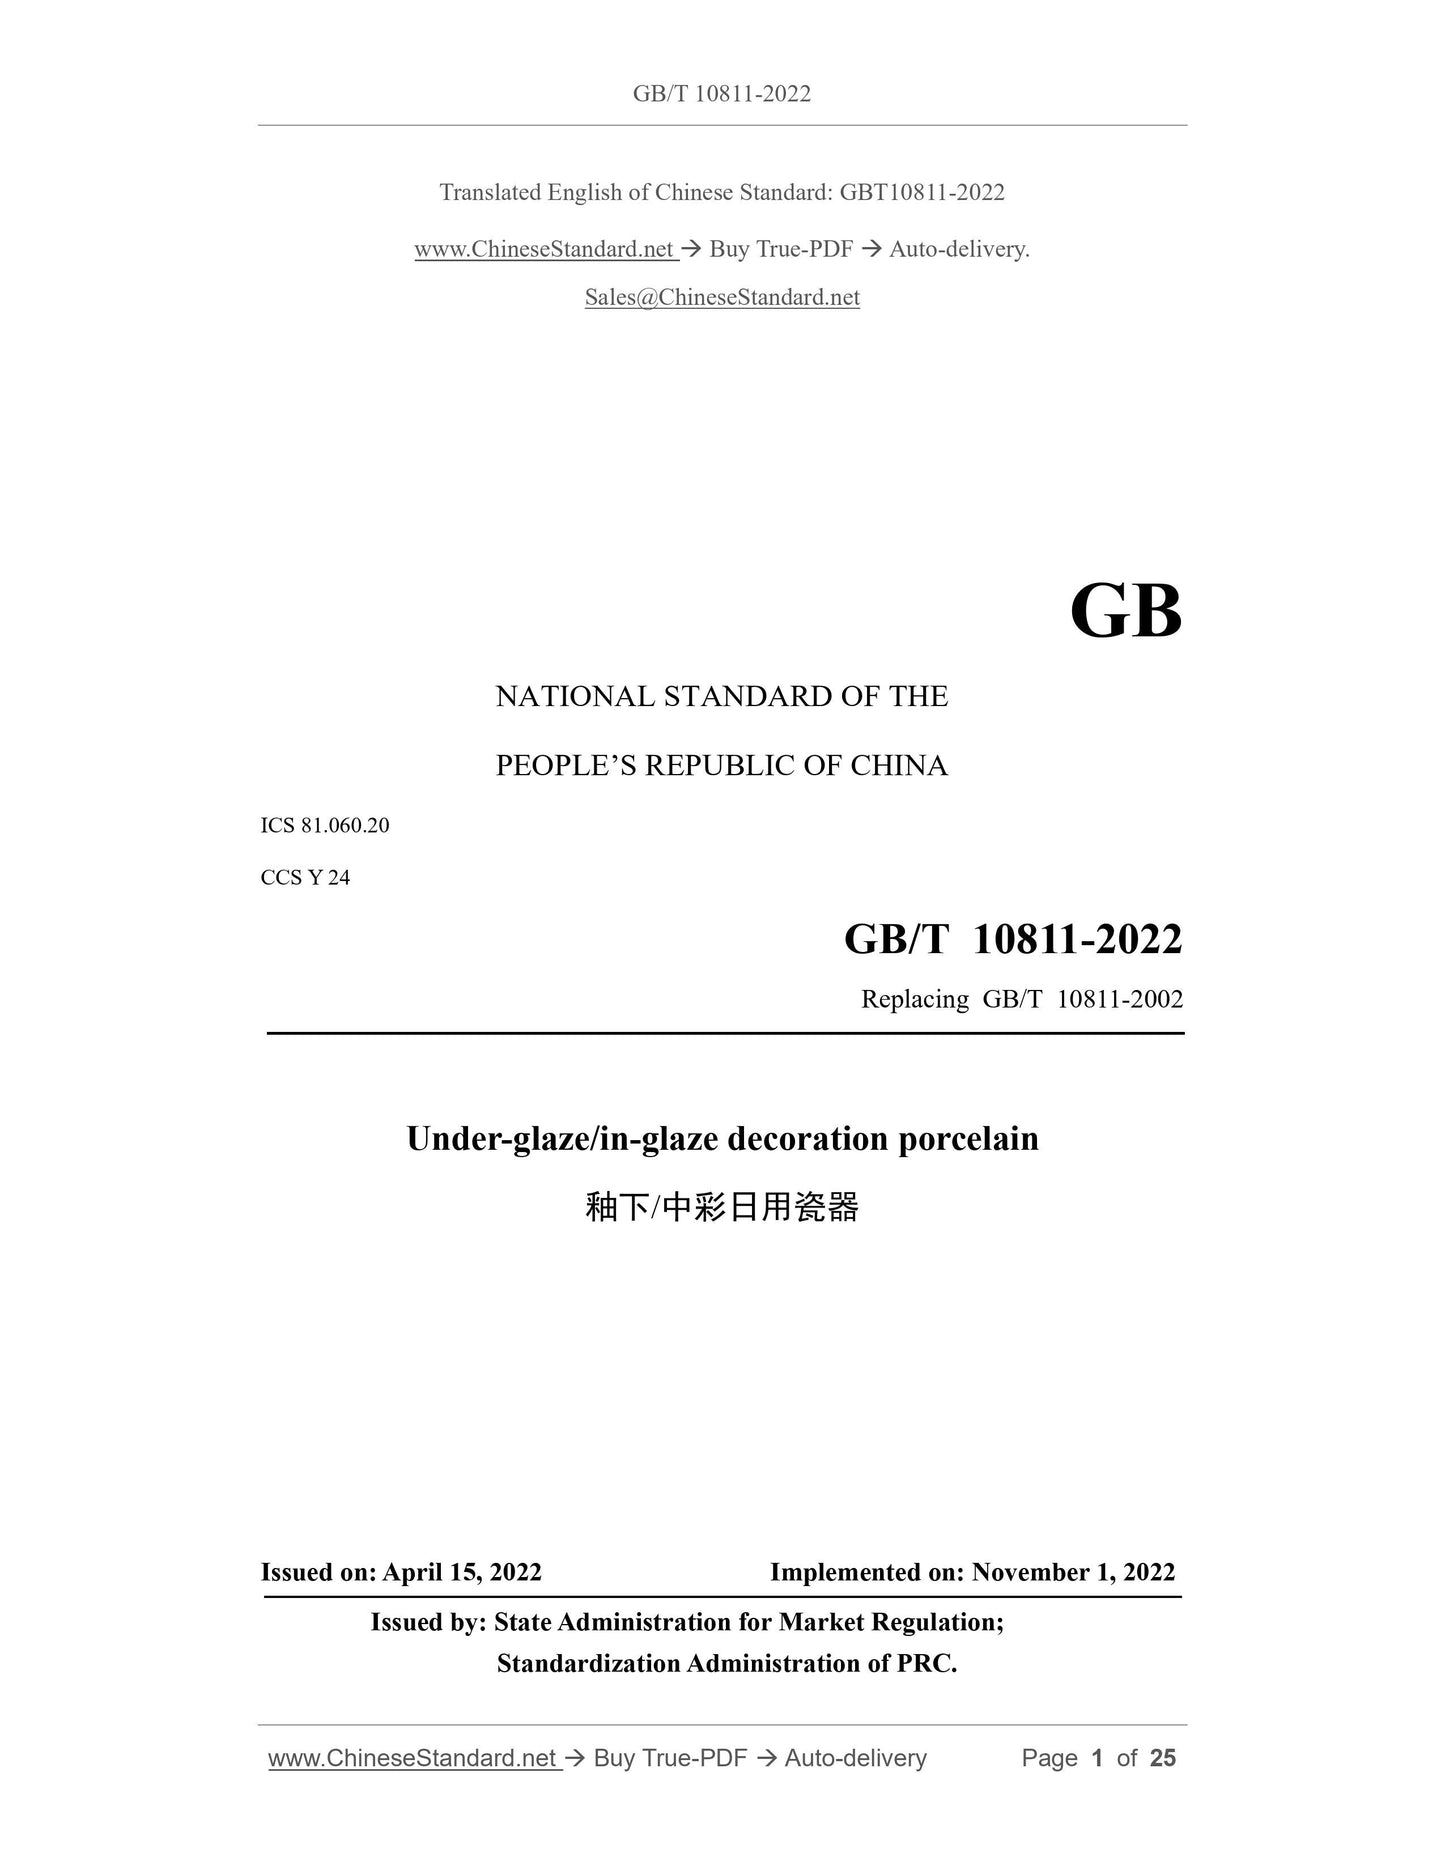 GB/T 10811-2022 Page 1